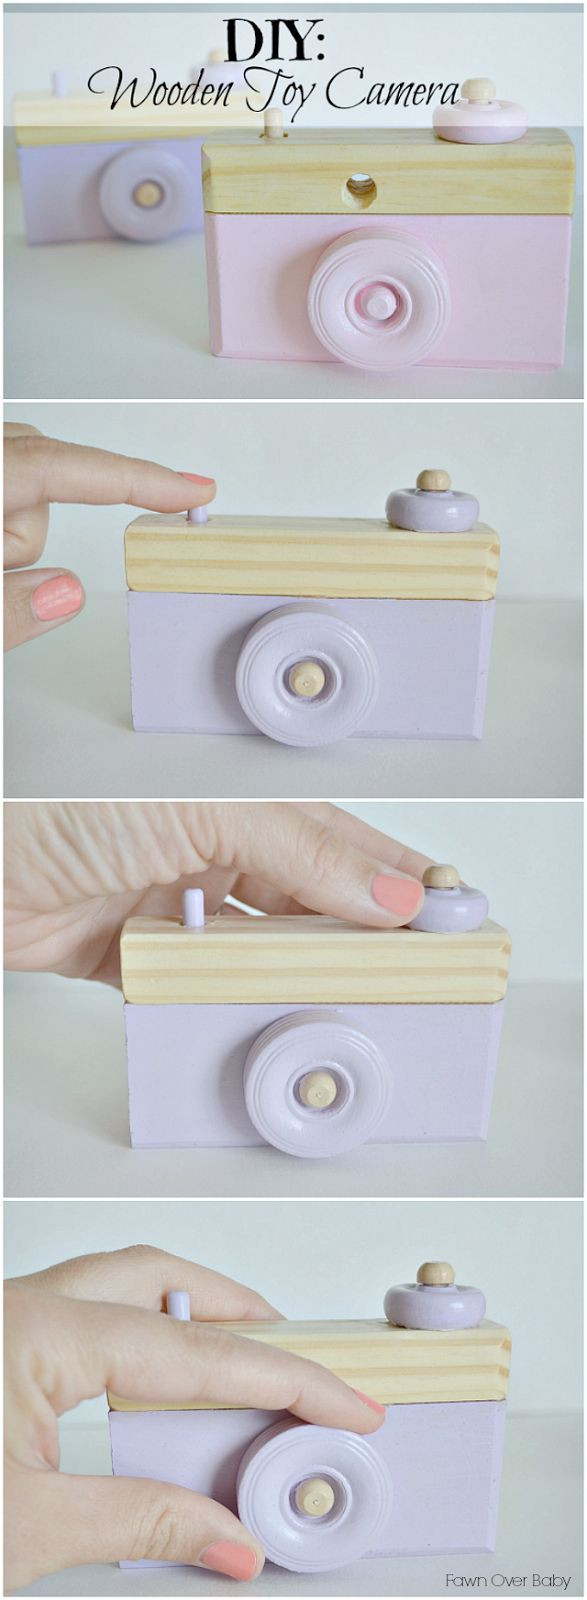 DIY Wood Toy
 Diy Wooden Toys WoodWorking Projects & Plans